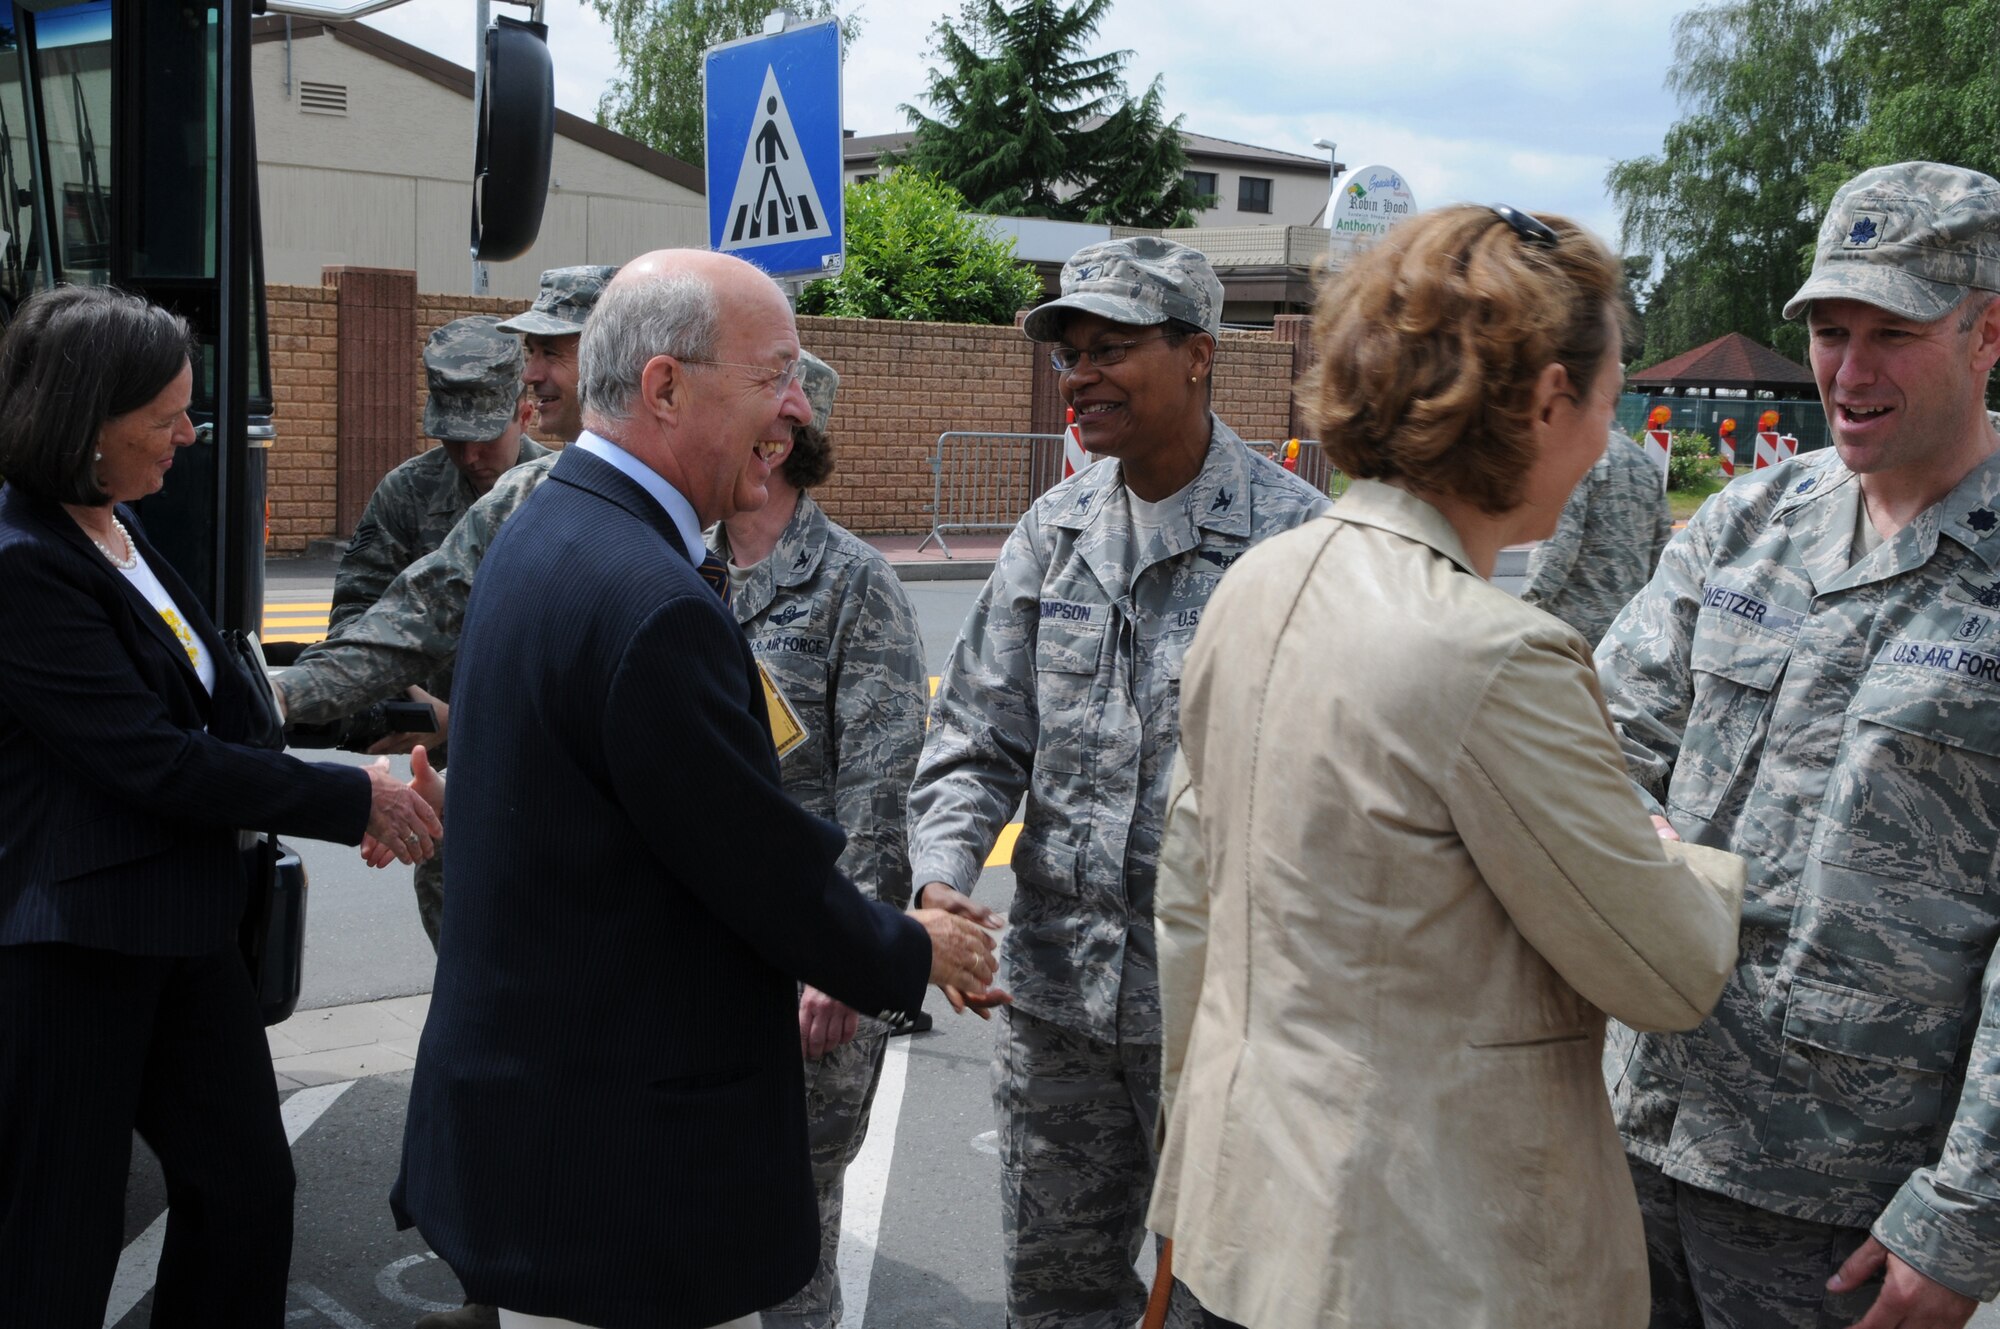 TRICARE-Europe Preferred Provider Network (PPN) host nation providers are welcomed by Ramstein Air Base personnel before a tour of the medical facilities they help support on Ramstein Air Base, Germany, June 4, 2009.  The PPN helps military members and their families with health care needs overseas. (U.S. Air Force photo by Airman 1st Class Caleb Pierce)